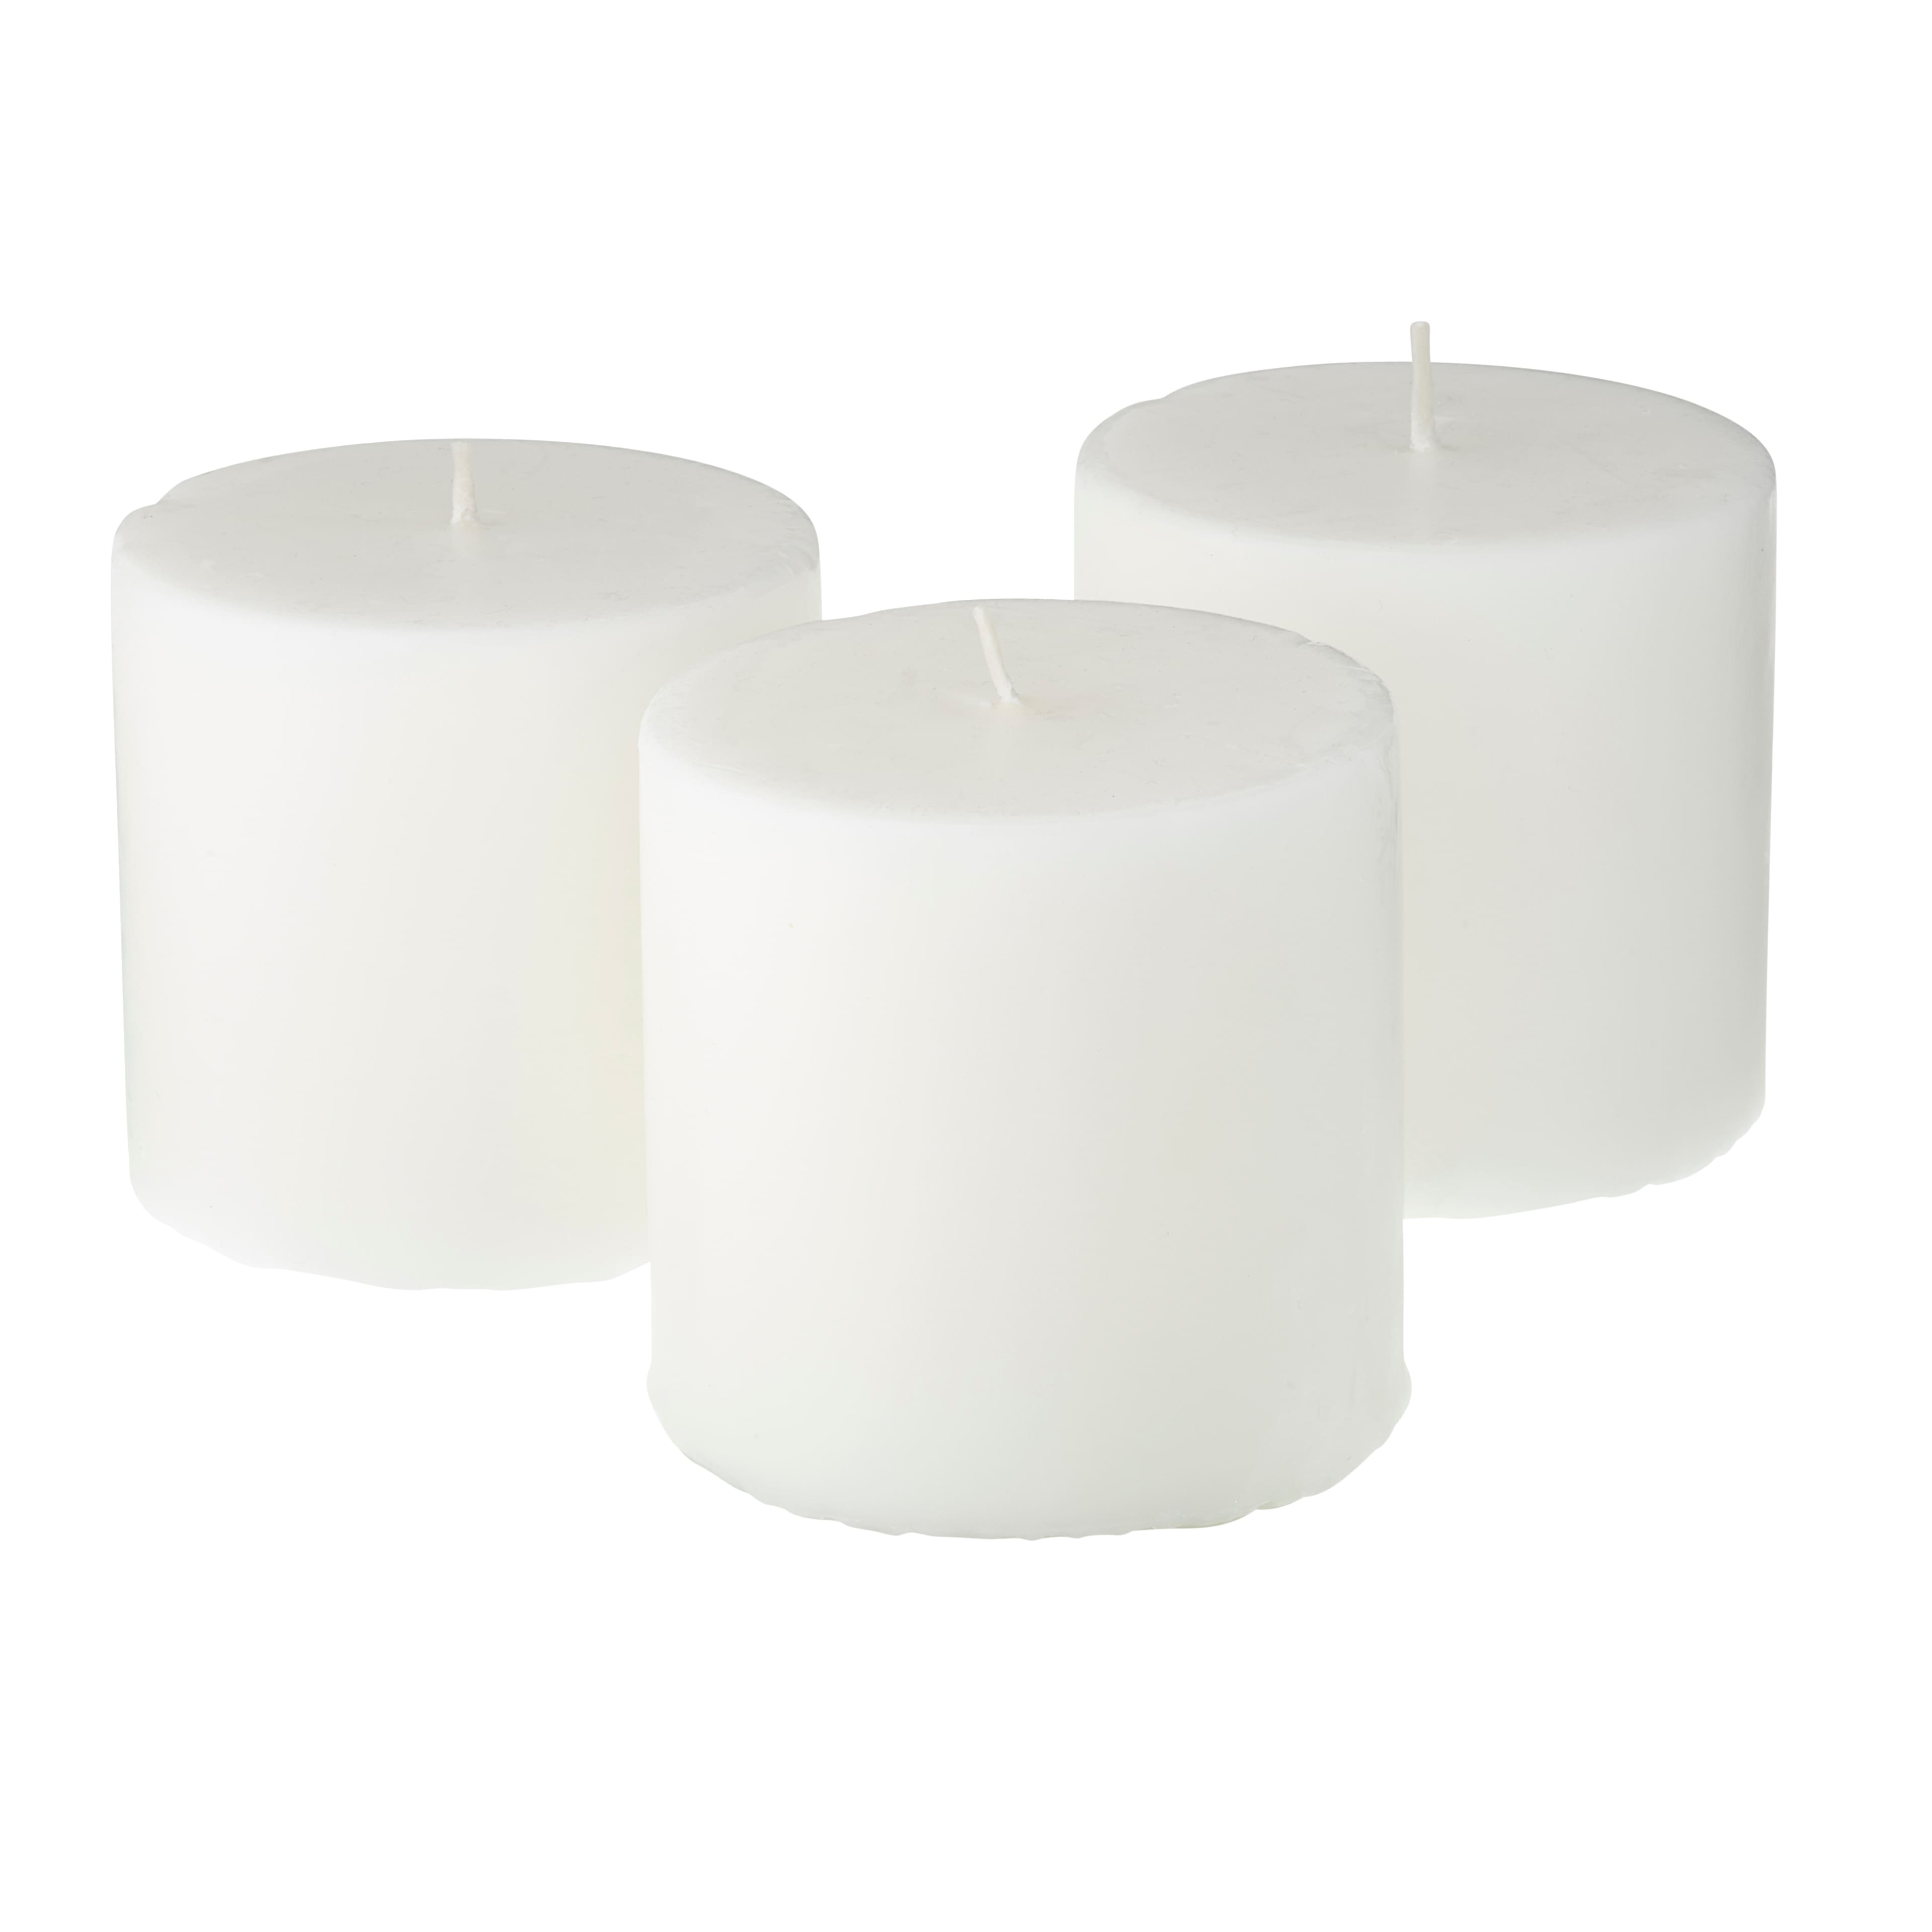 12 Packs: 3 ct. (36 total) Basic Elements™ White Pillar Candles by Ashland®